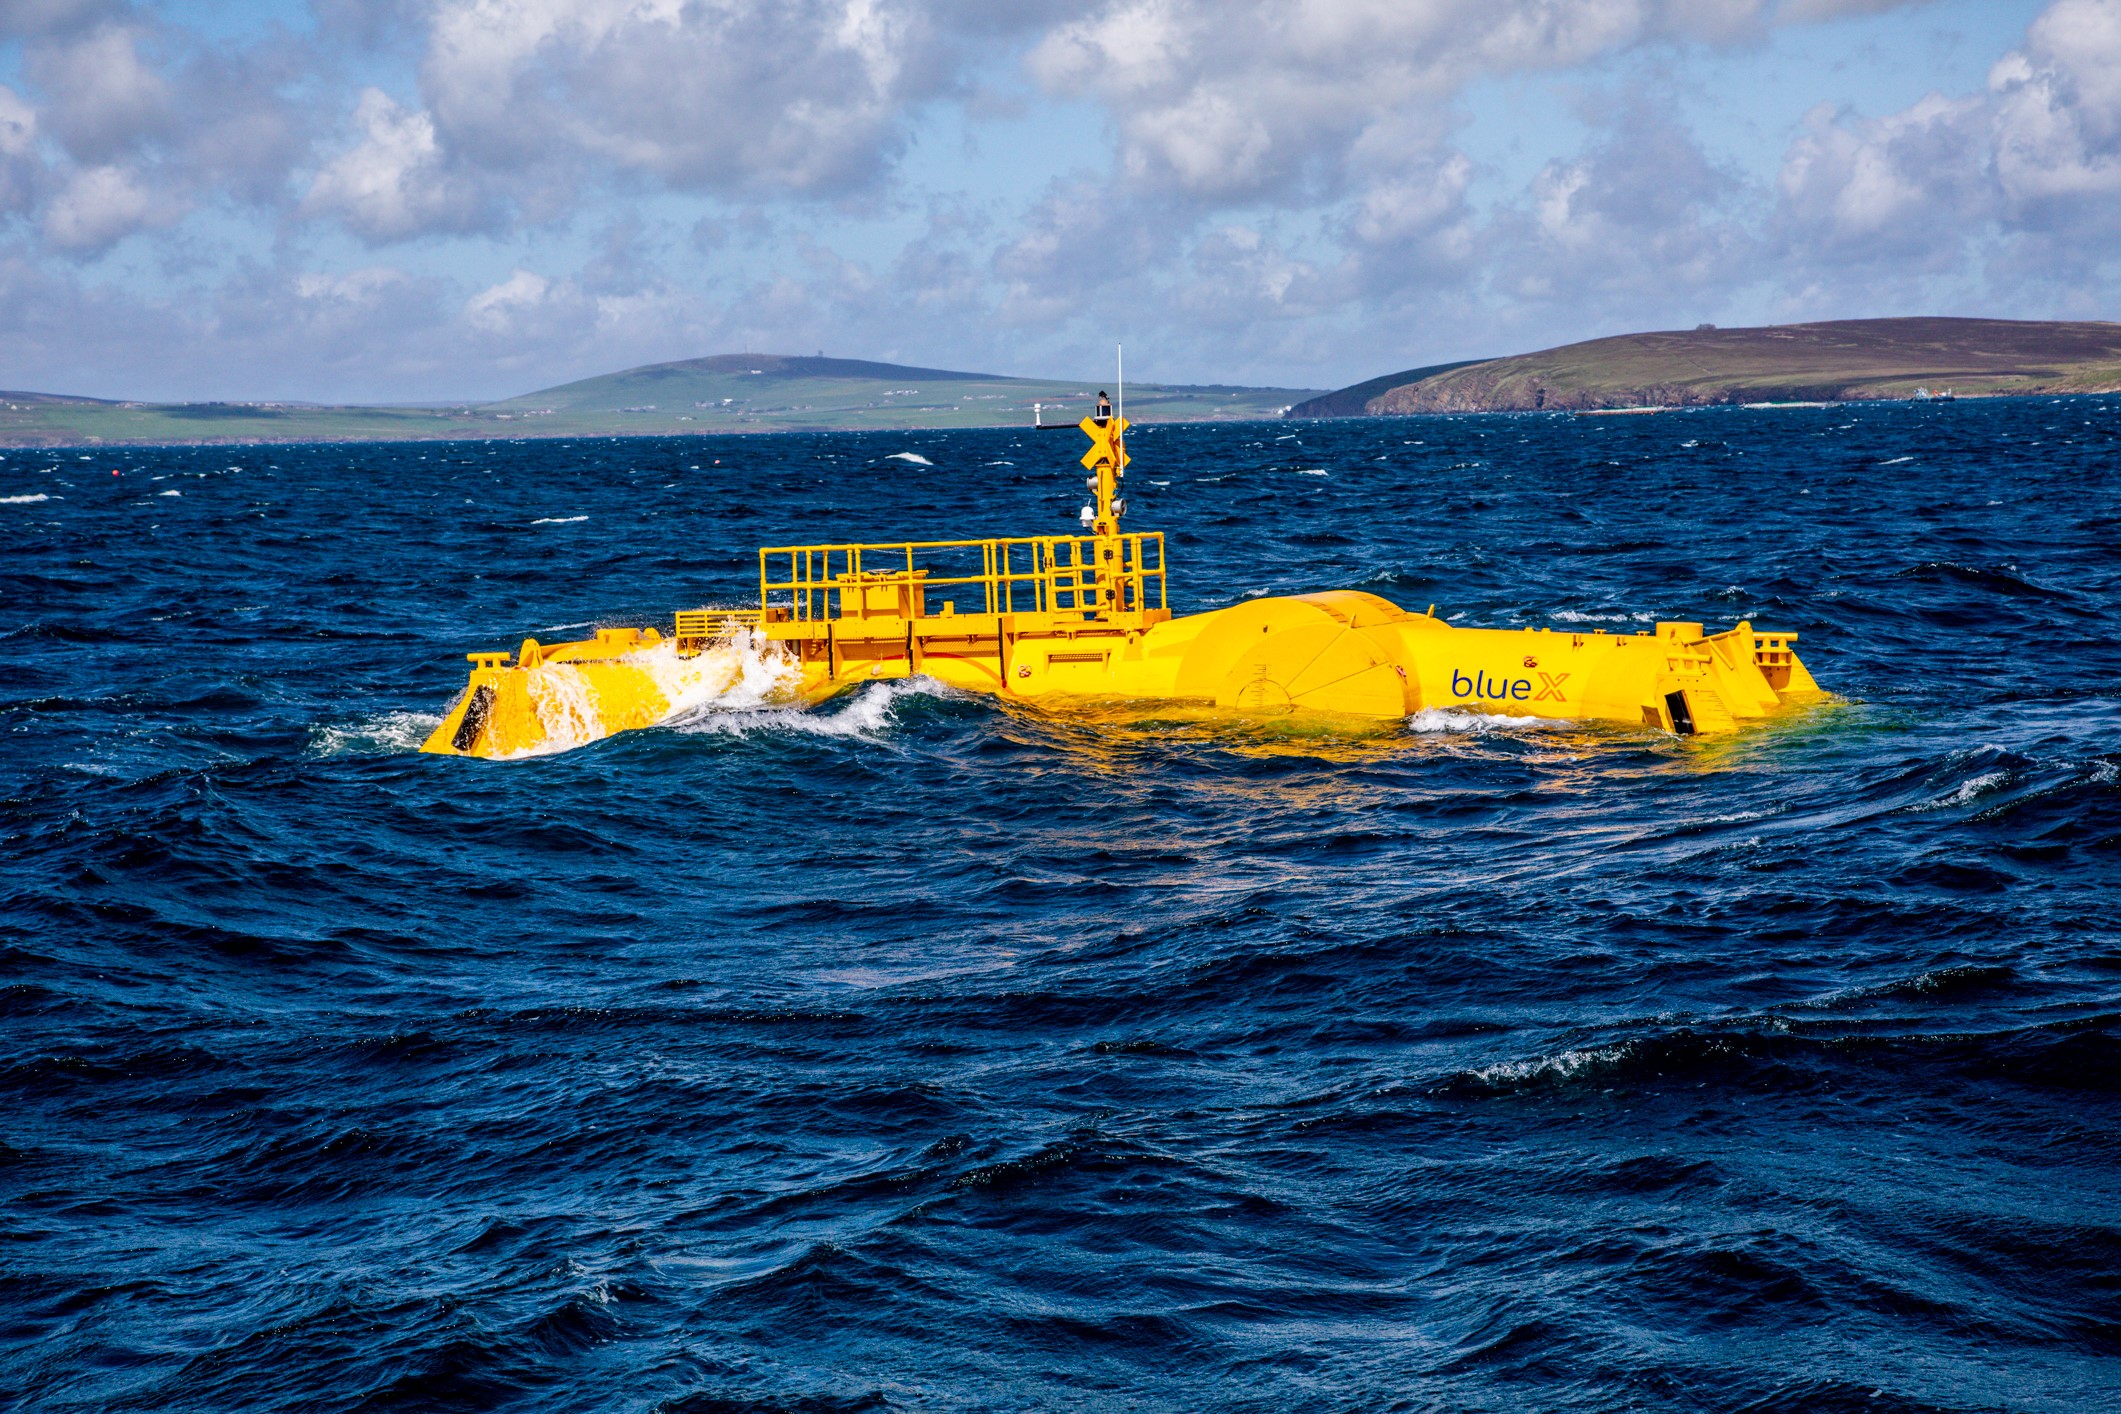 Lessons Learned from Wave Energy Deployments